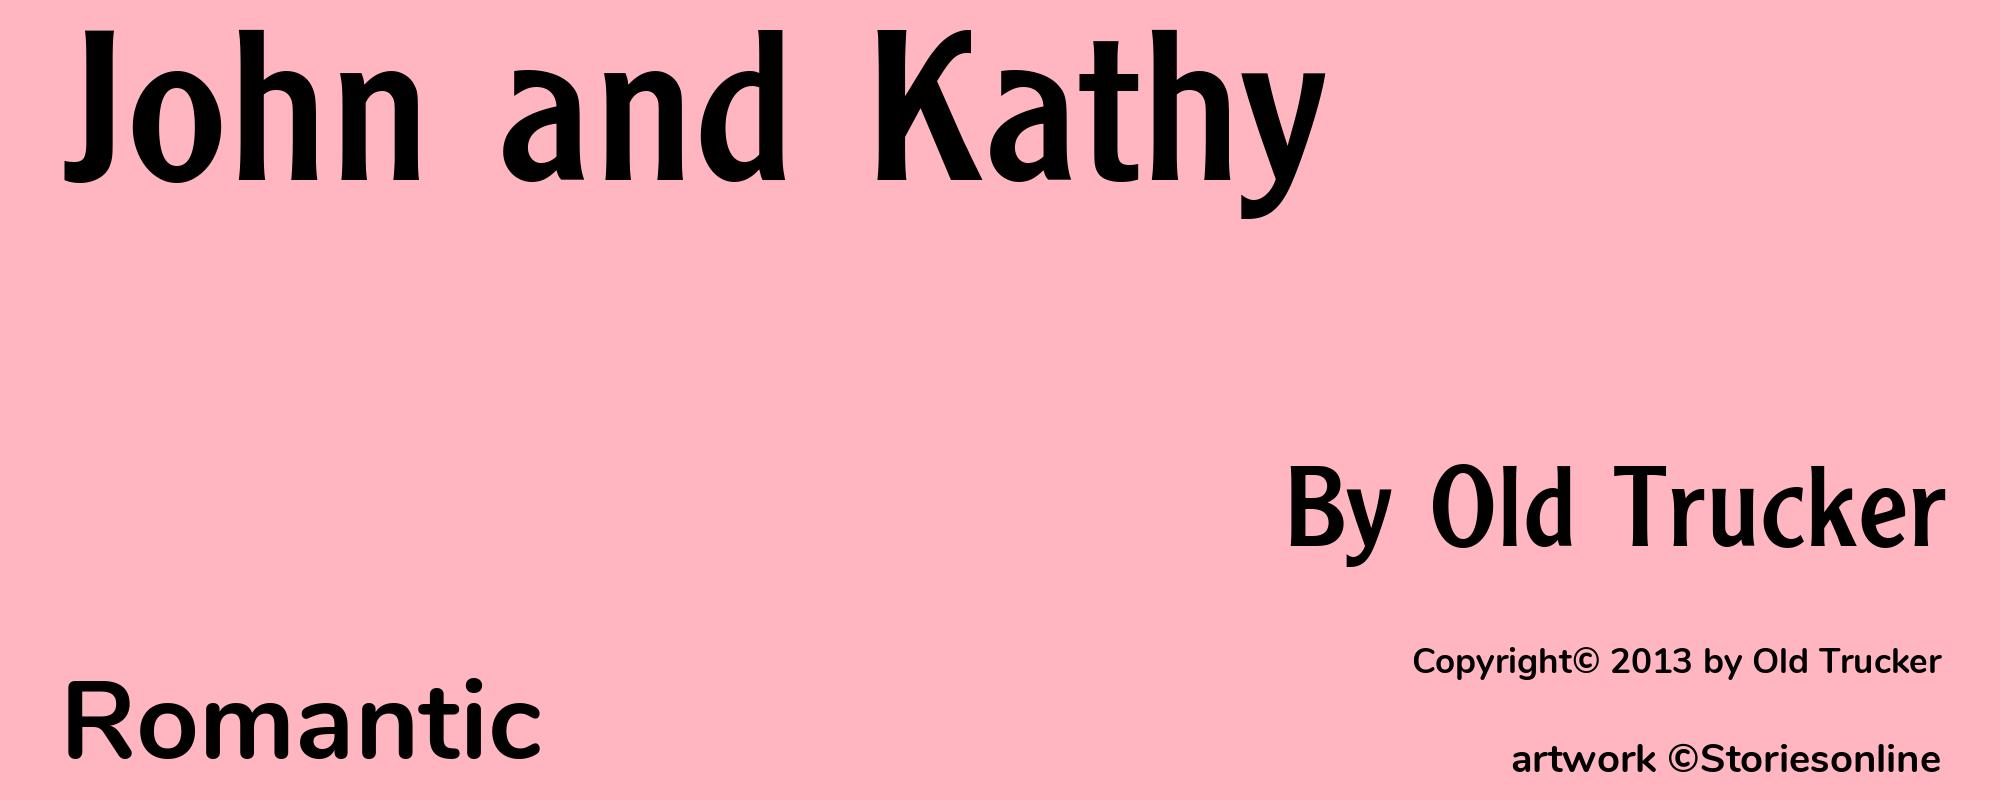 John and Kathy - Cover